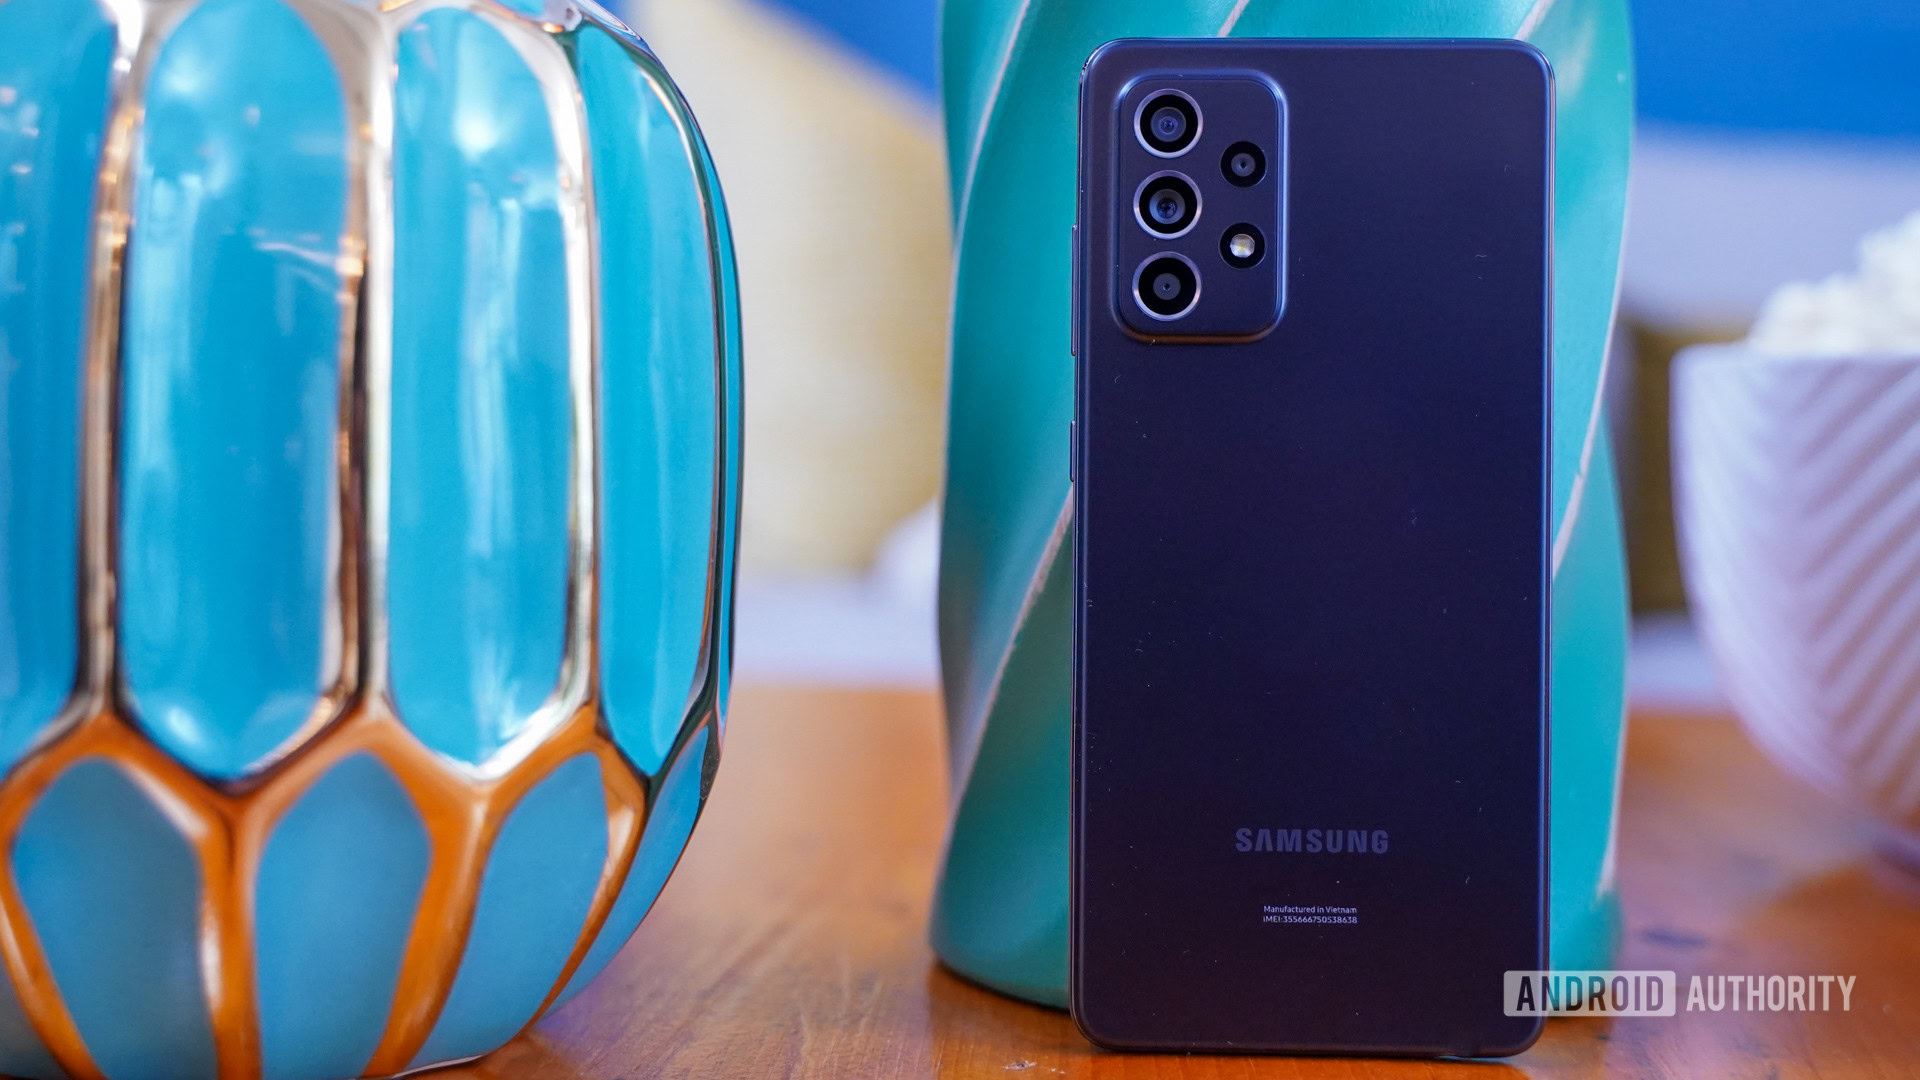 Samsung Galaxy A 52 5G standing with vases